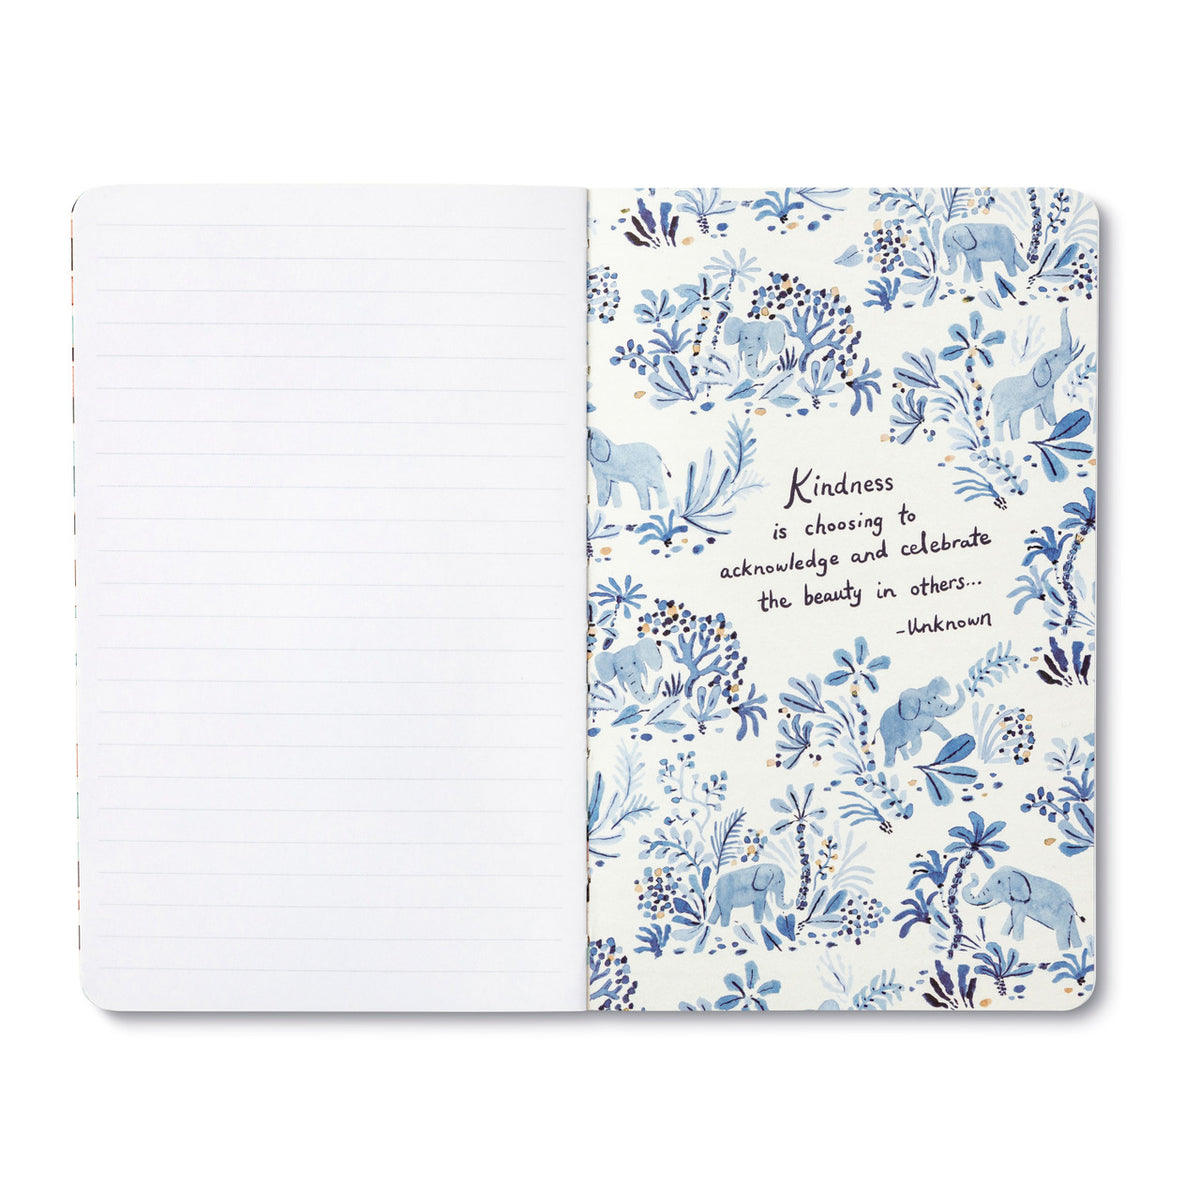 Every Kindness Matters Write Now Softcover Journal